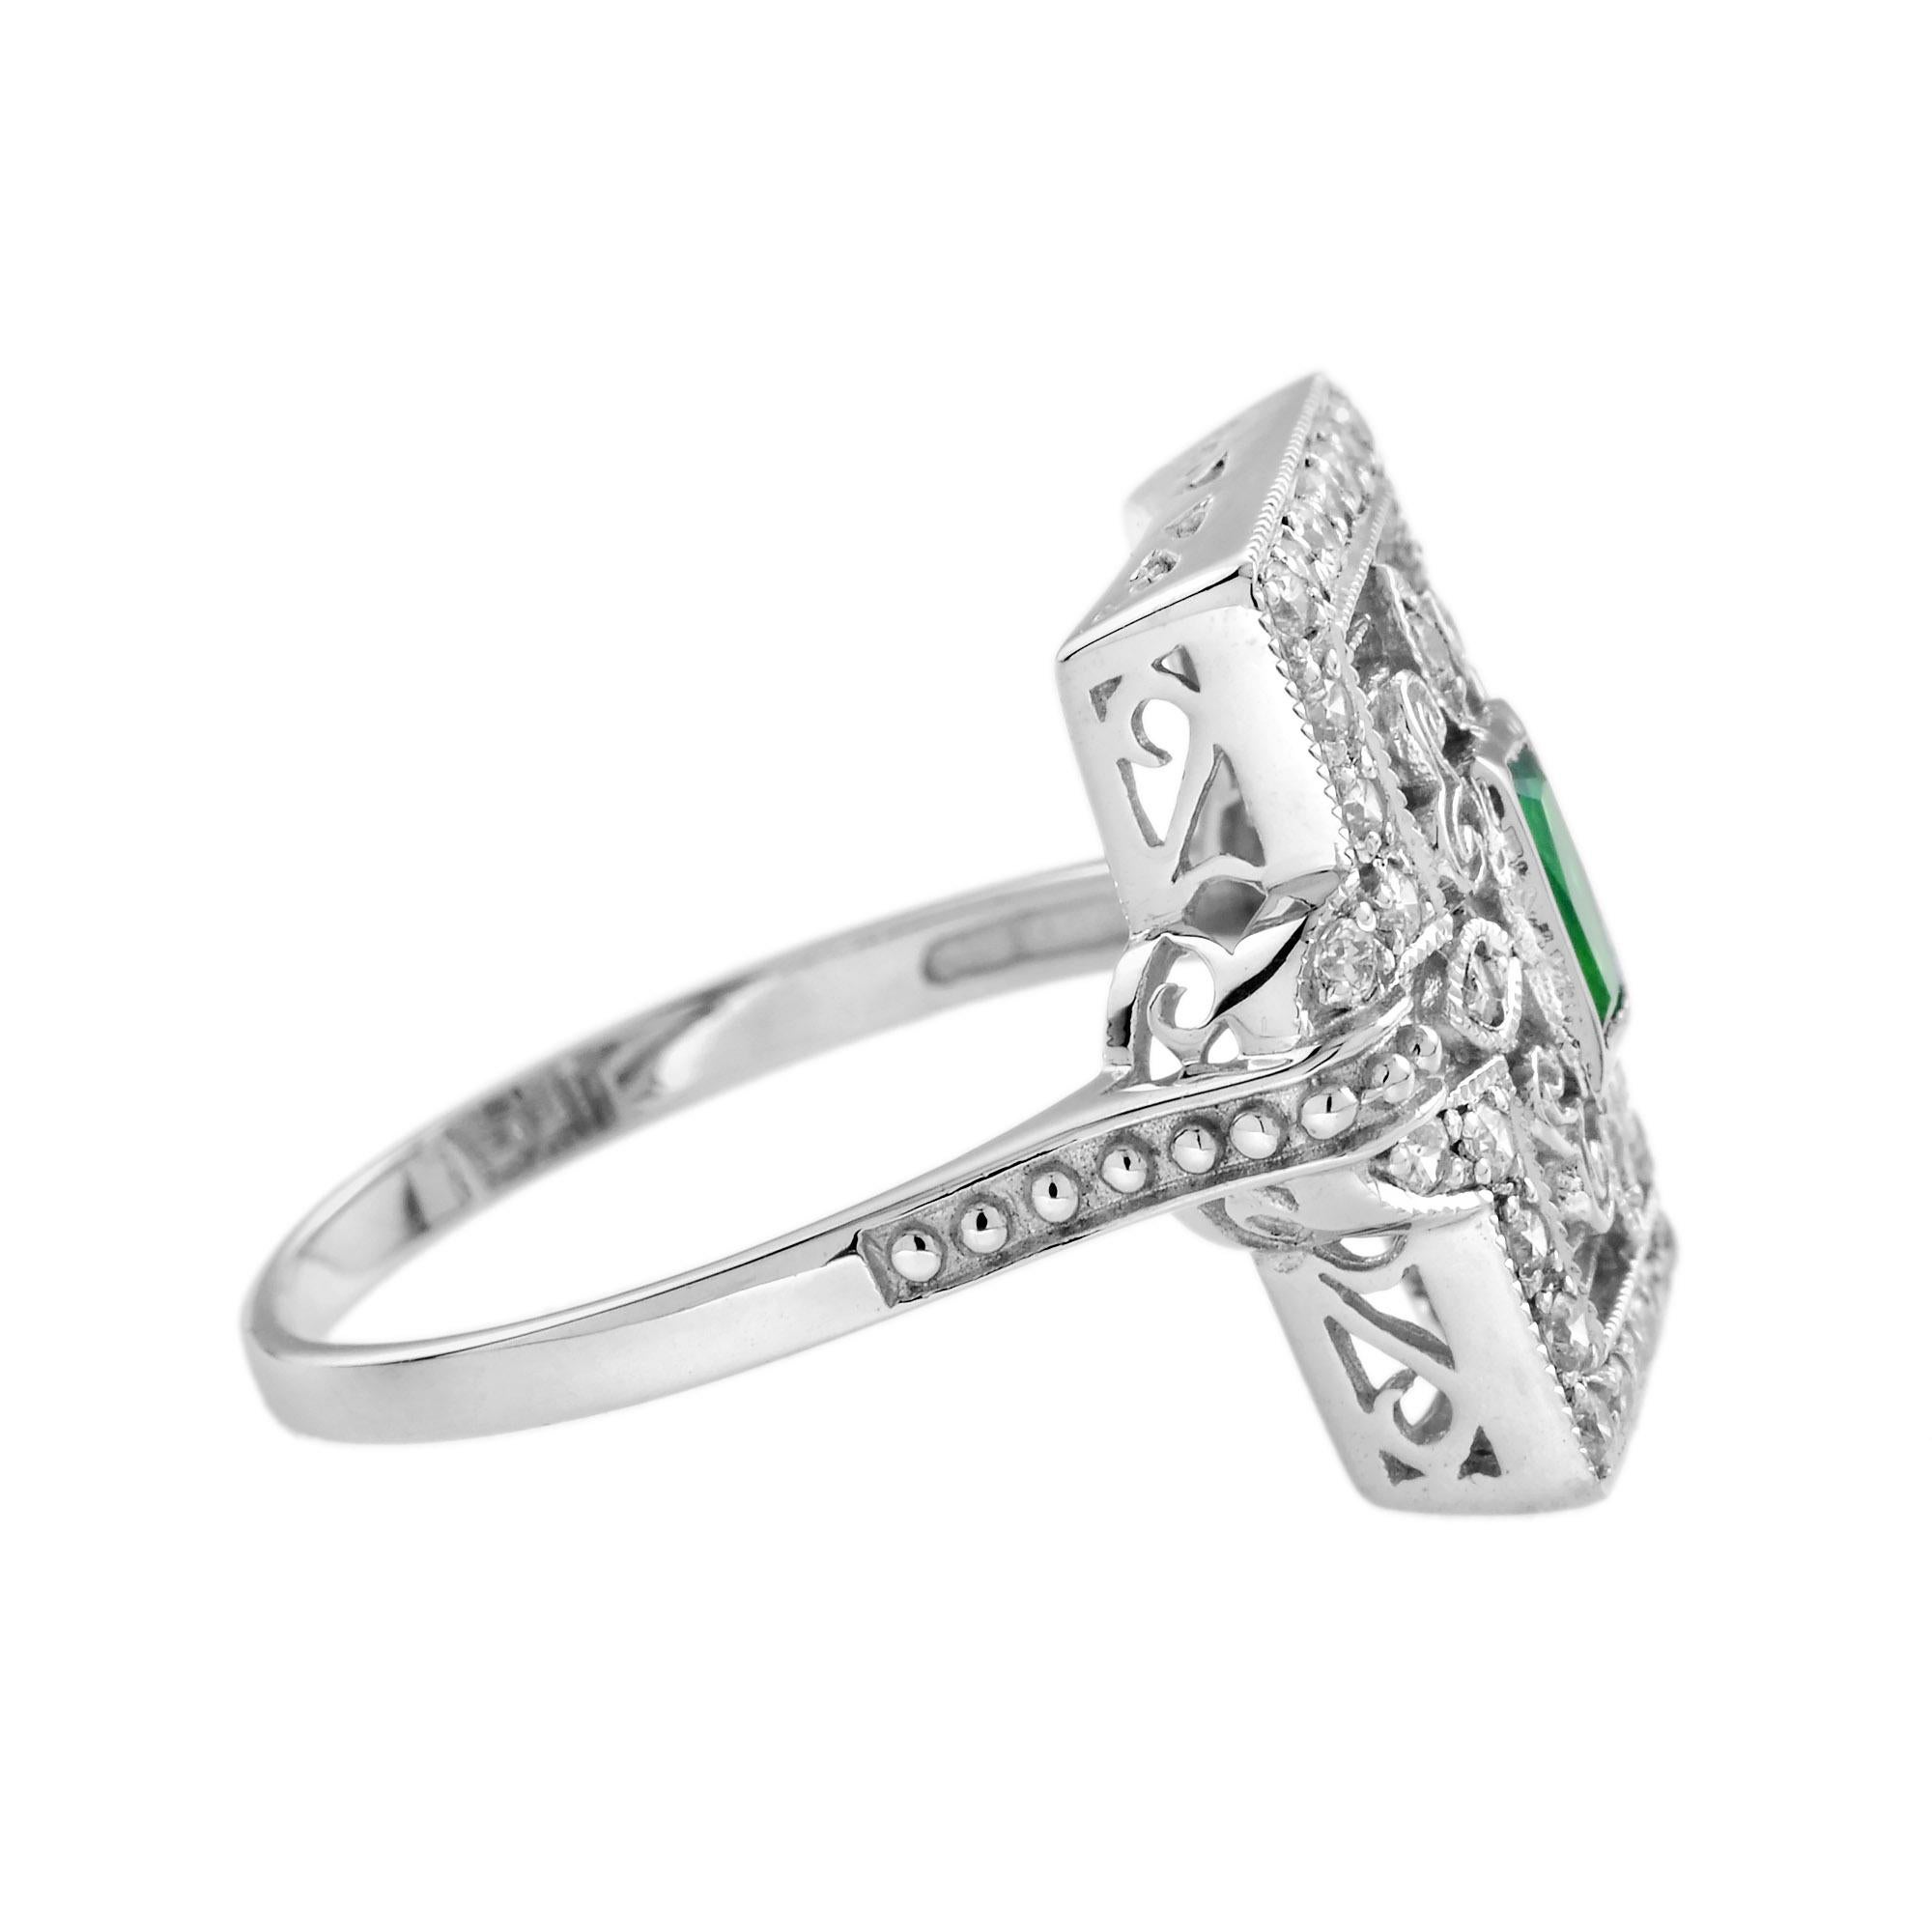 For Sale:  Emerald and Diamond Square Shape Art Deco Style Ring in 9K White Gold 4